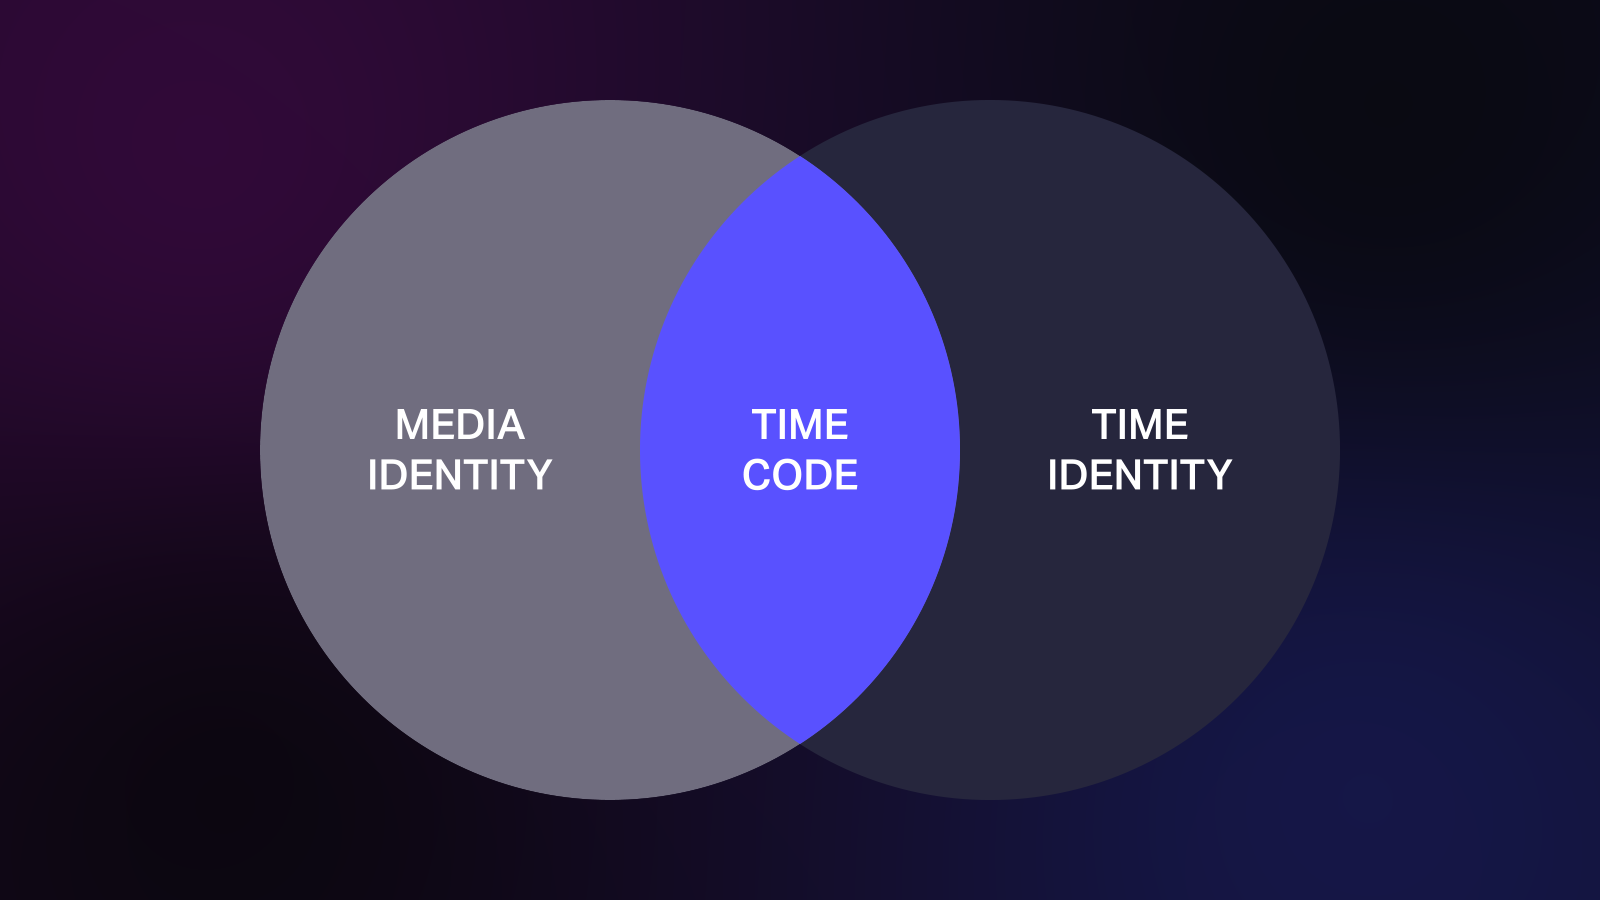 Timecode connects time and media